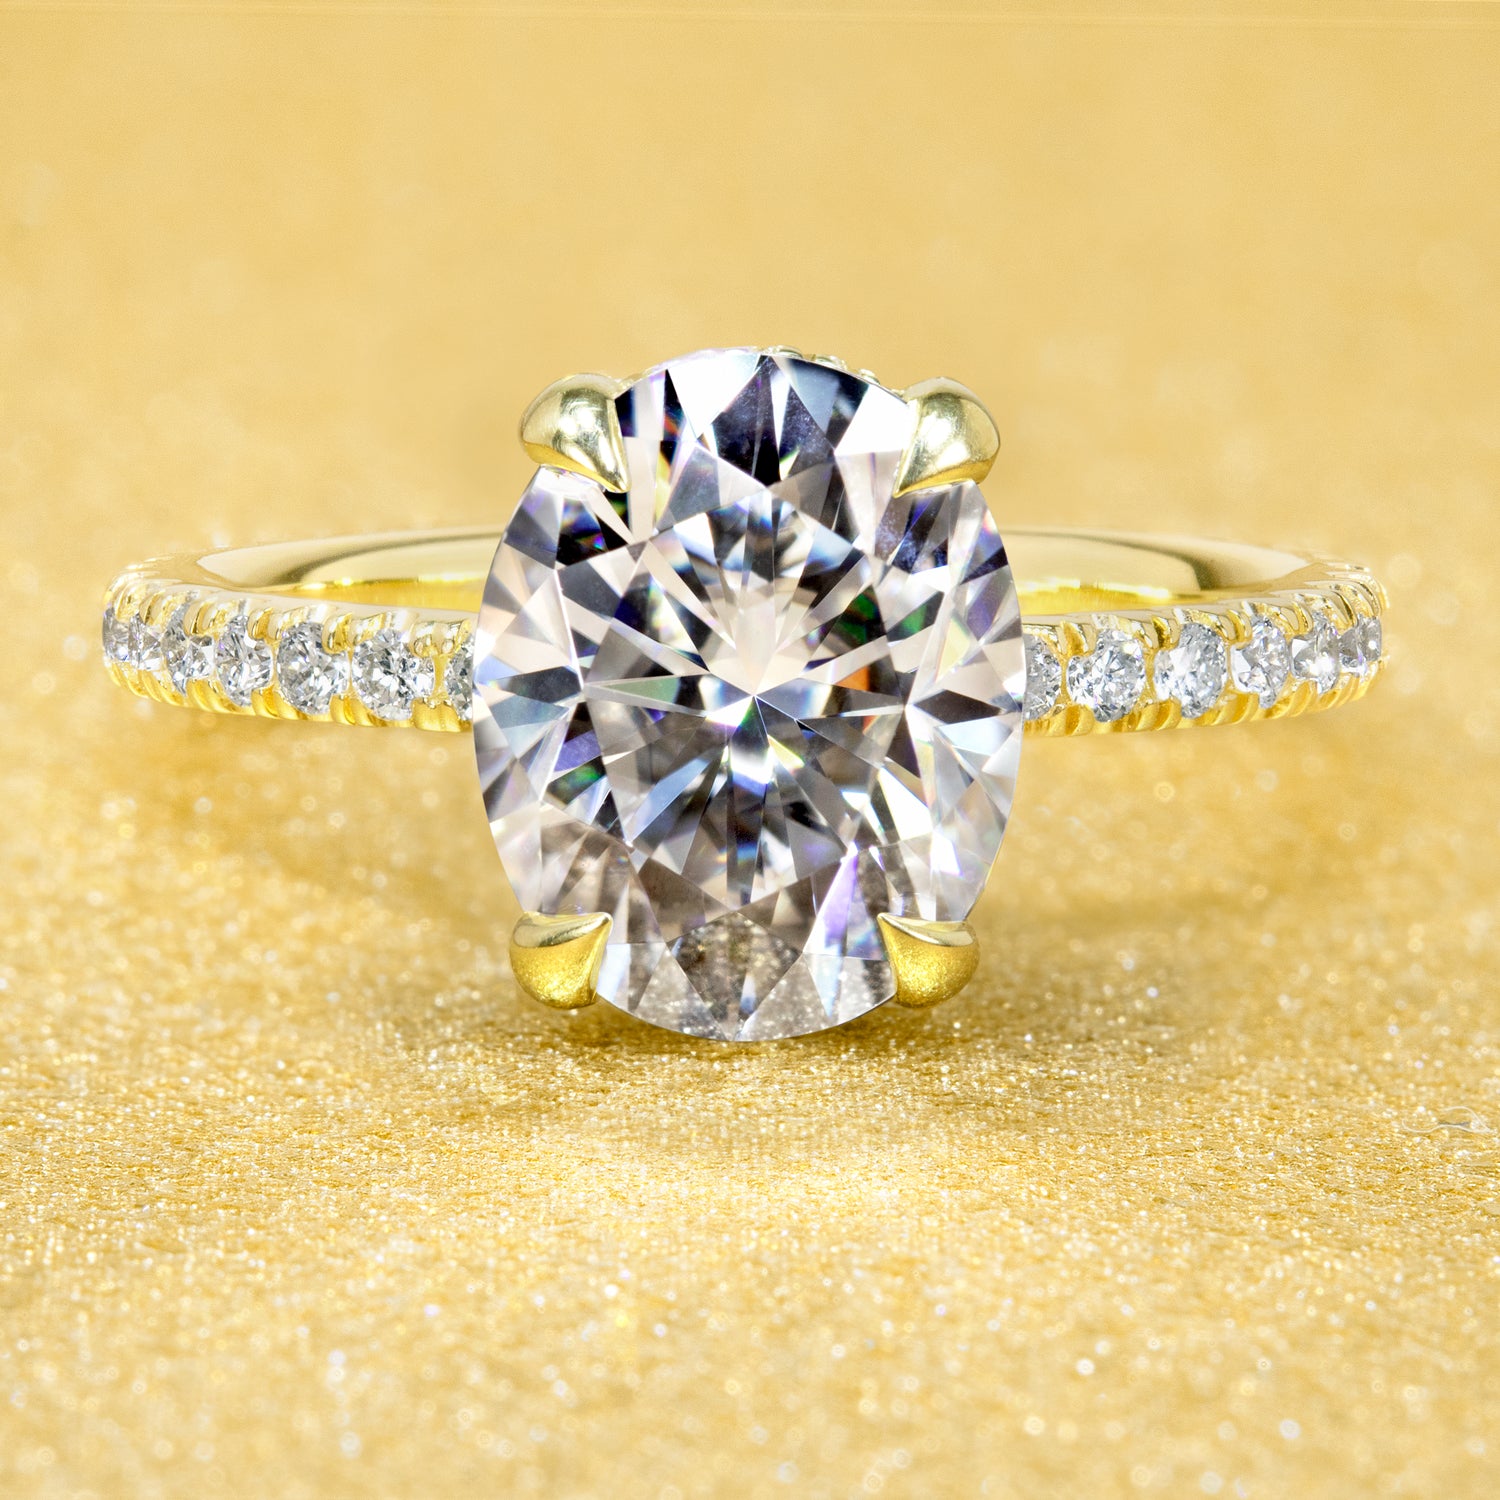 Browse through our collection by carat size to find the perfect engagement ring you are looking for!